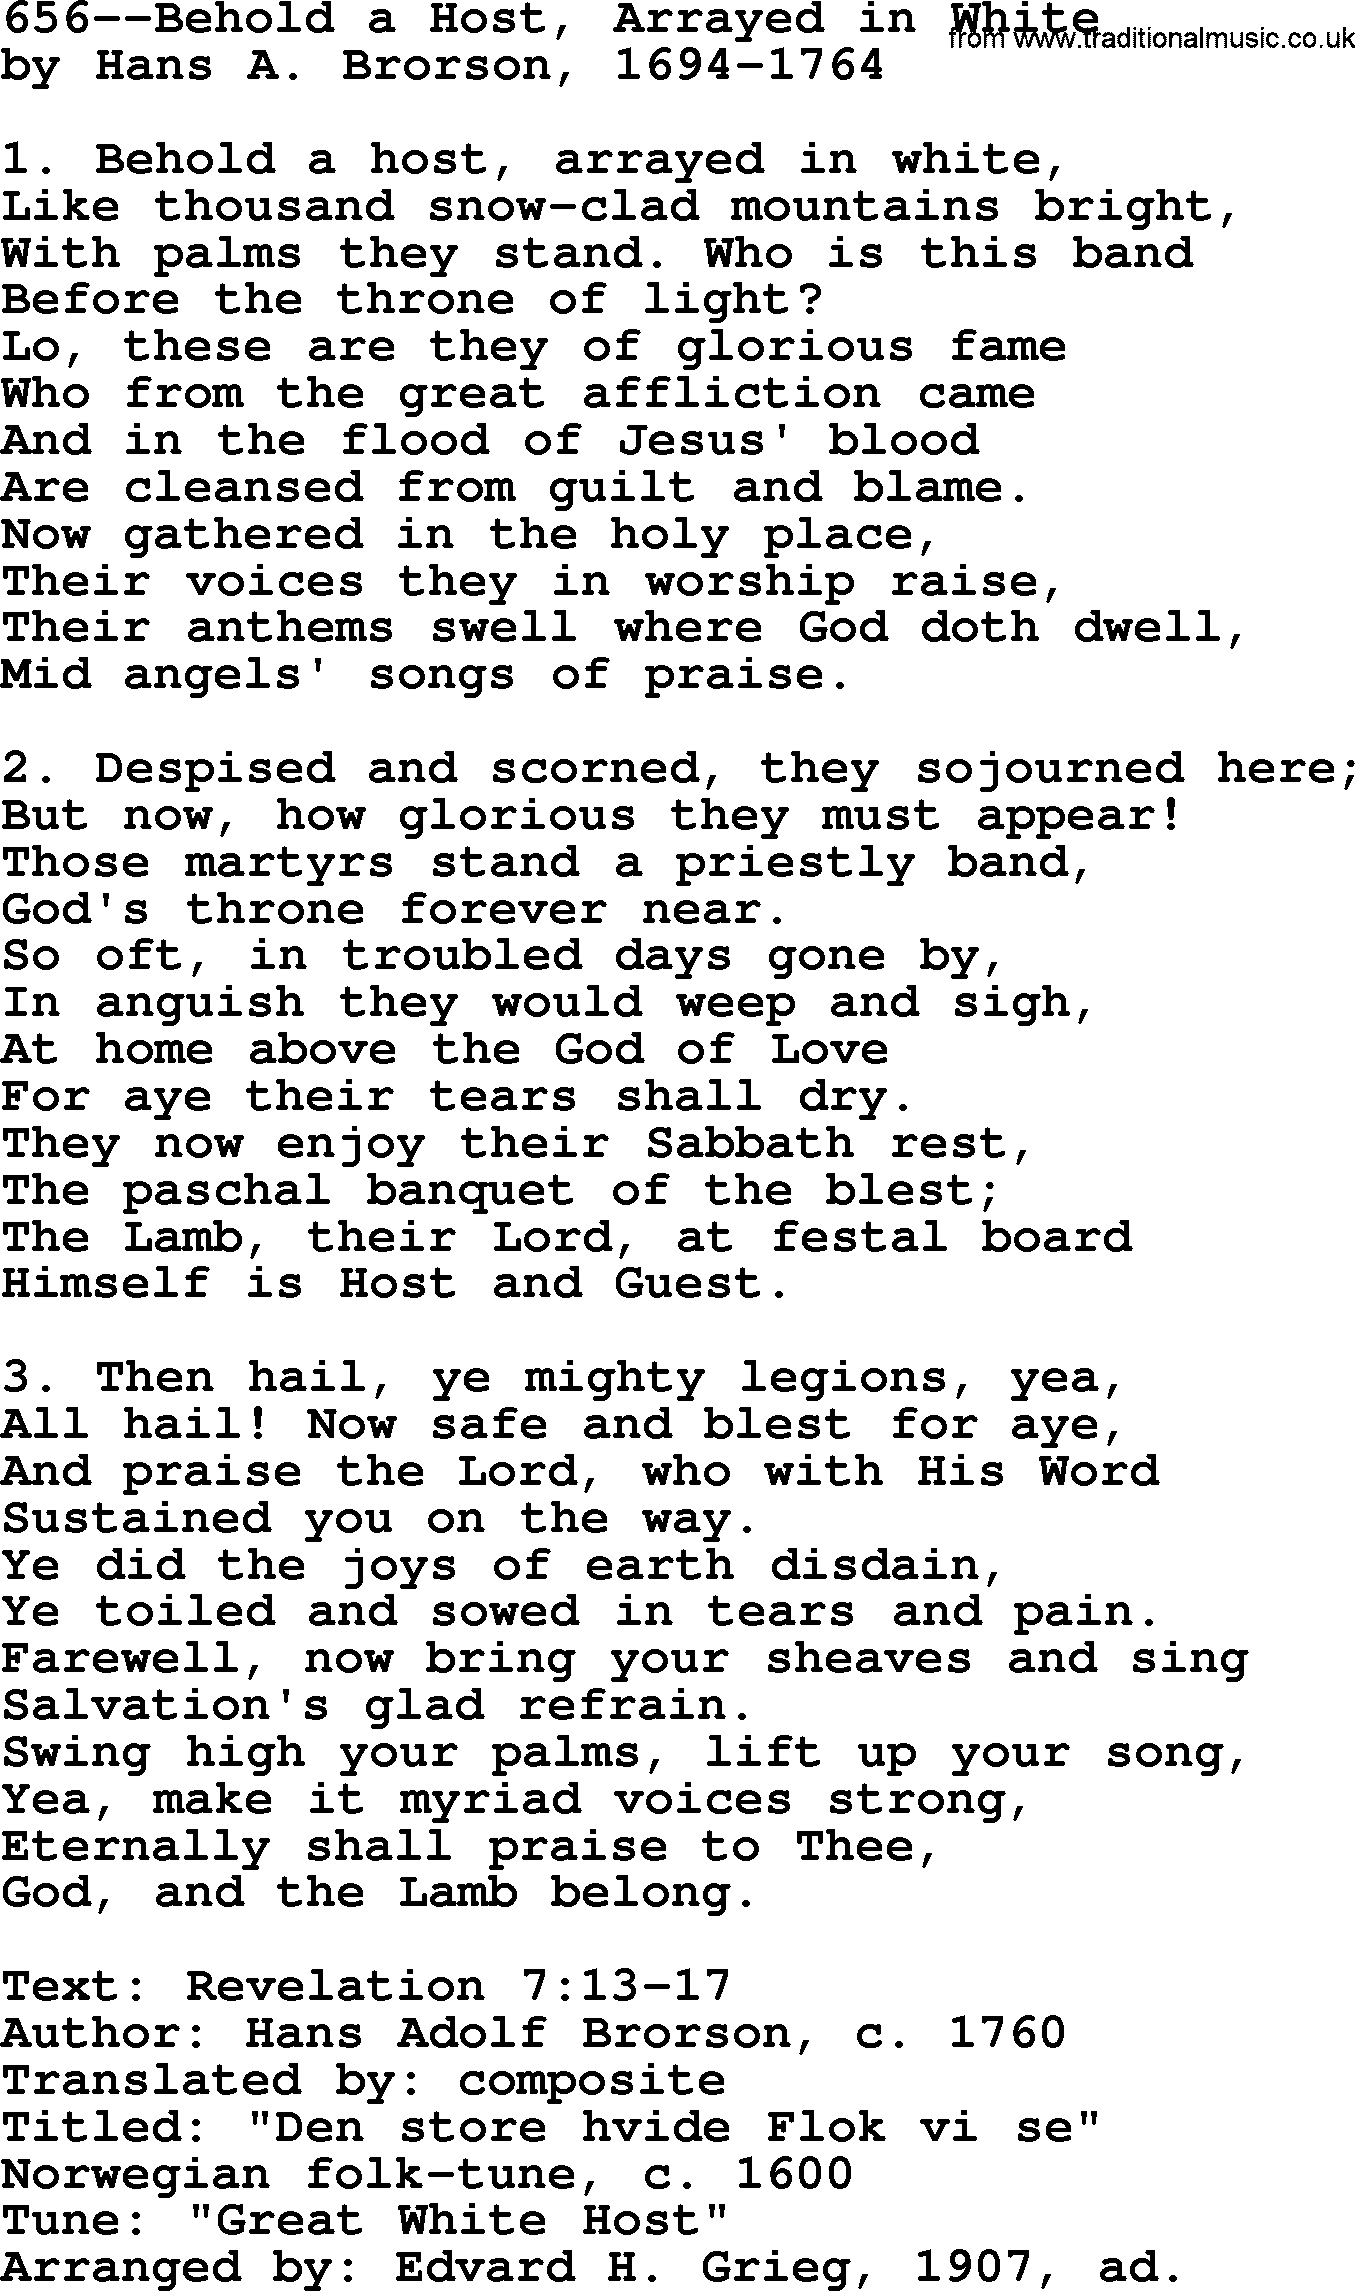 Lutheran Hymn: 656--Behold a Host, Arrayed in White.txt lyrics with PDF